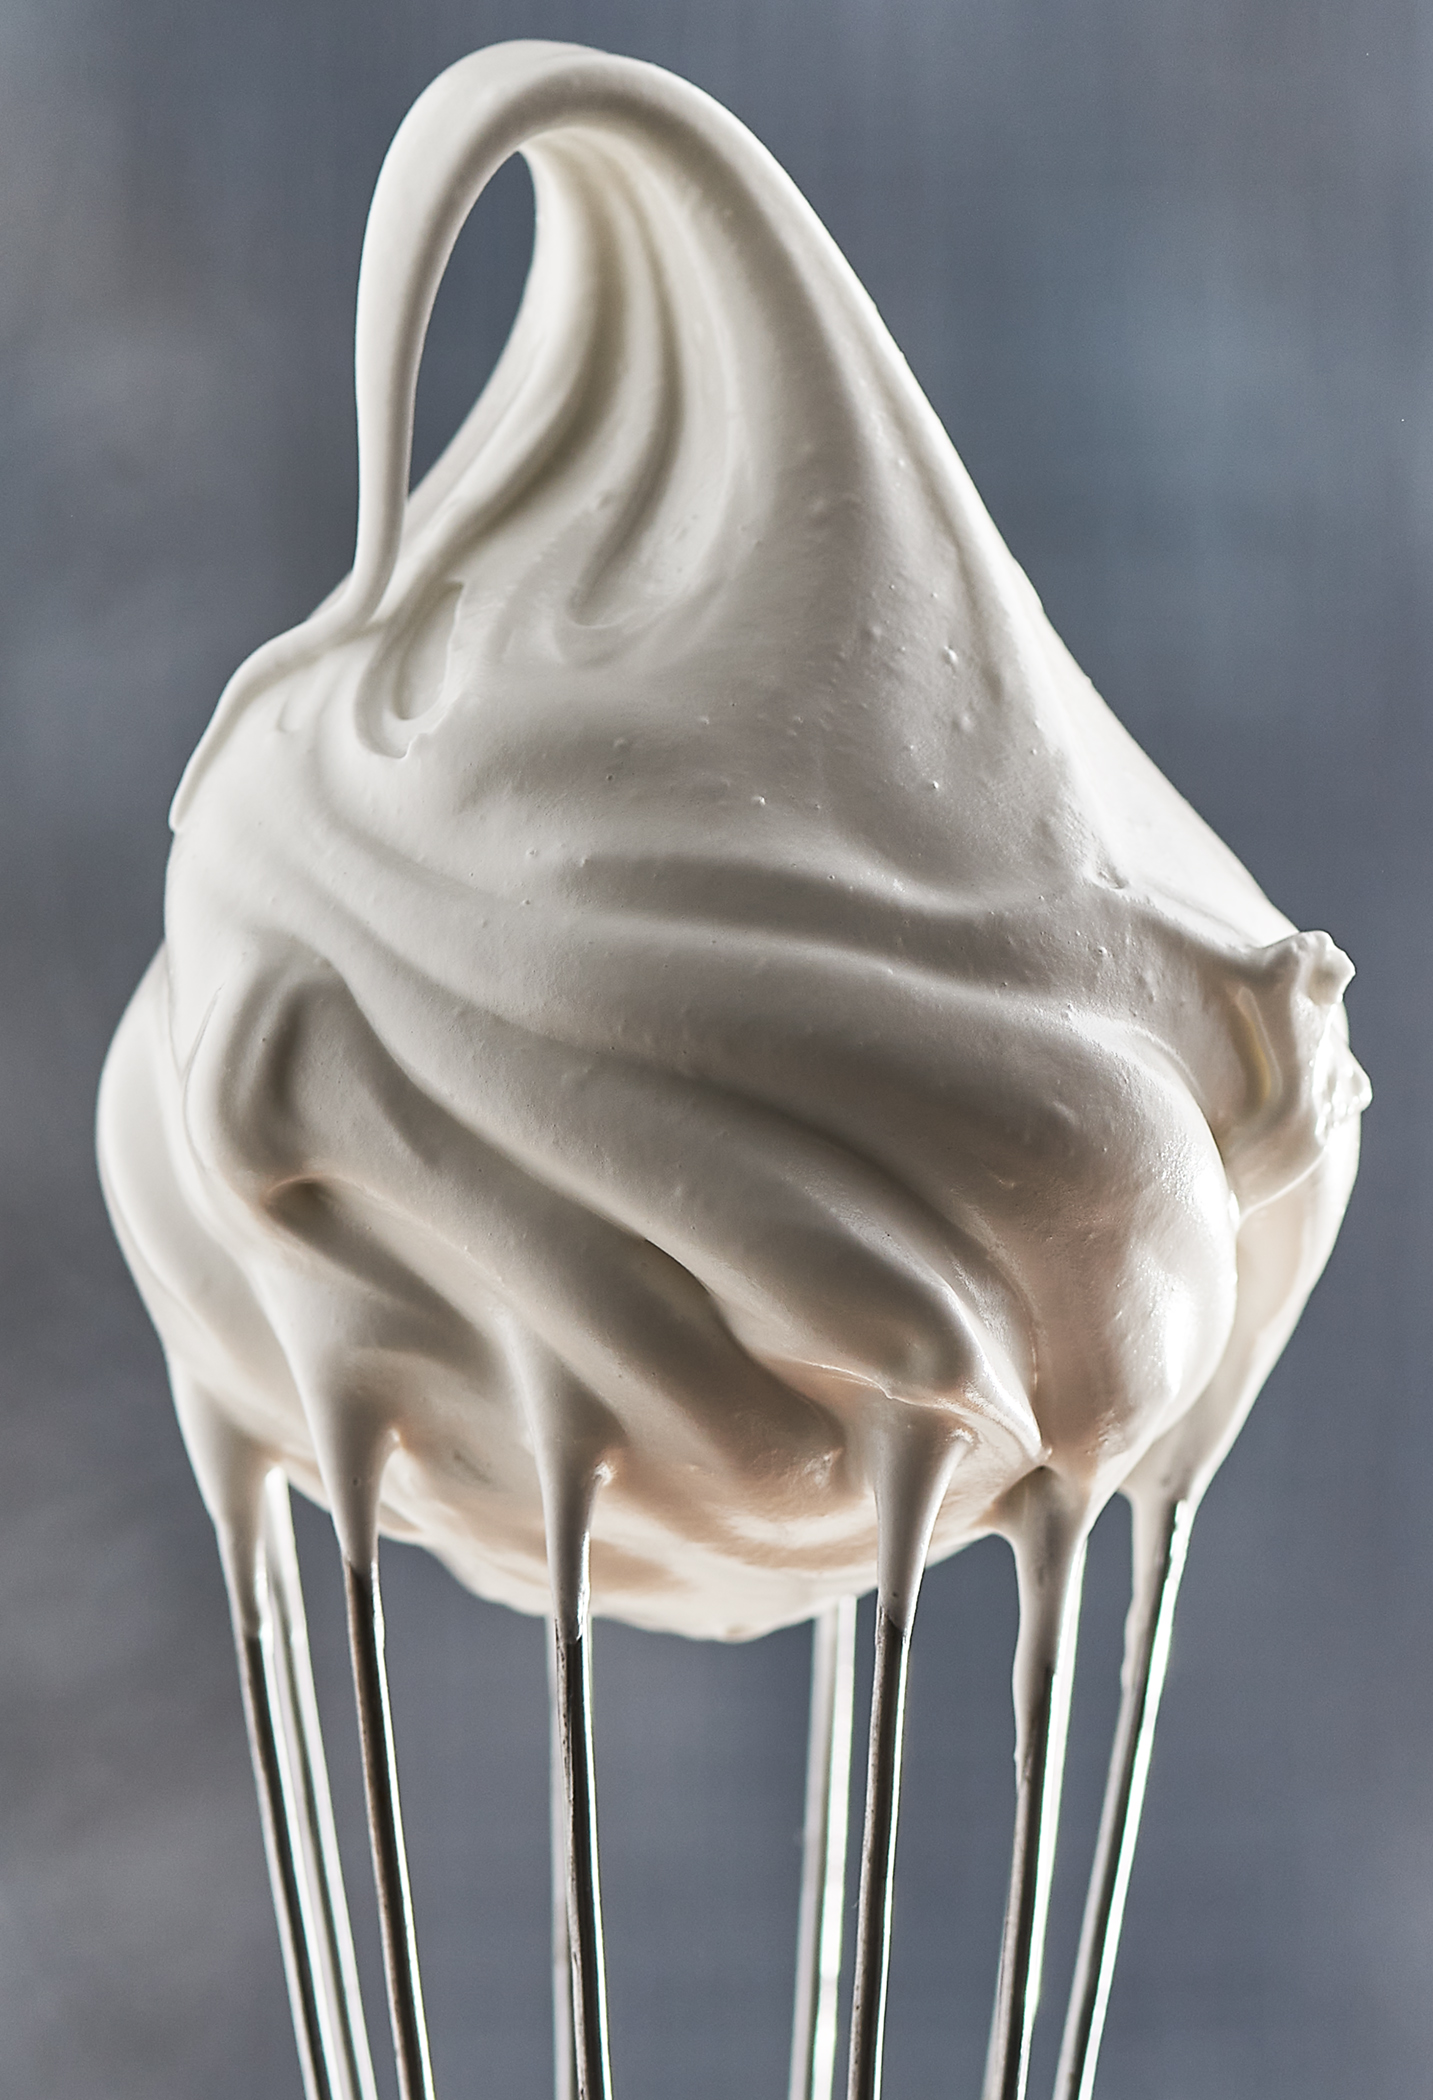 PieHole_Meringue_Topping_2915